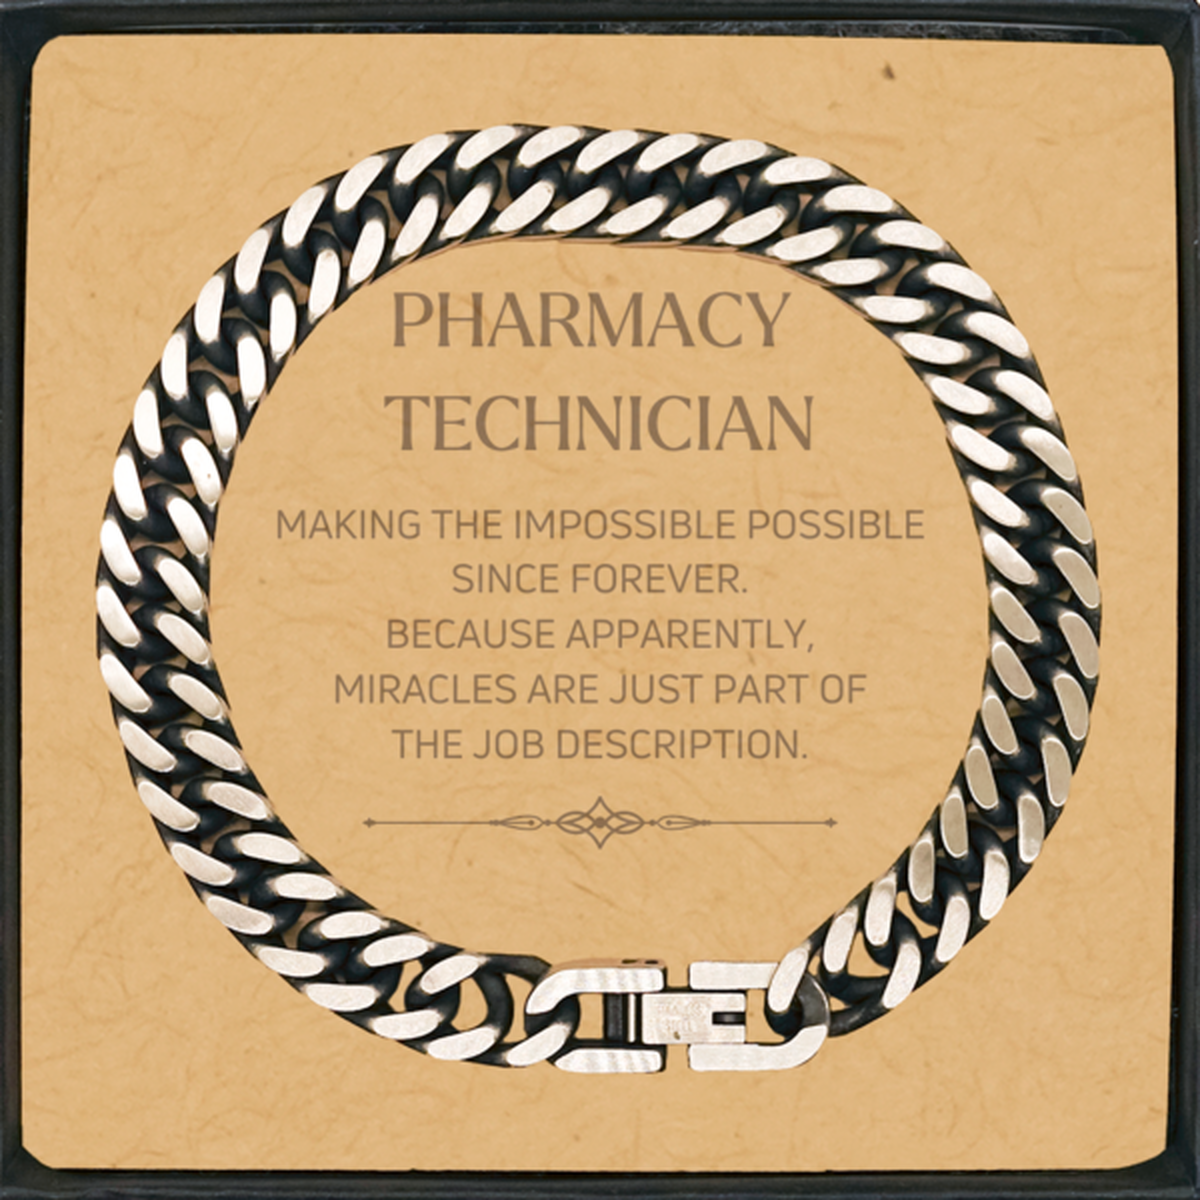 Funny Pharmacy Technician Gifts, Miracles are just part of the job description, Inspirational Birthday Cuban Link Chain Bracelet For Pharmacy Technician, Men, Women, Coworkers, Friends, Boss